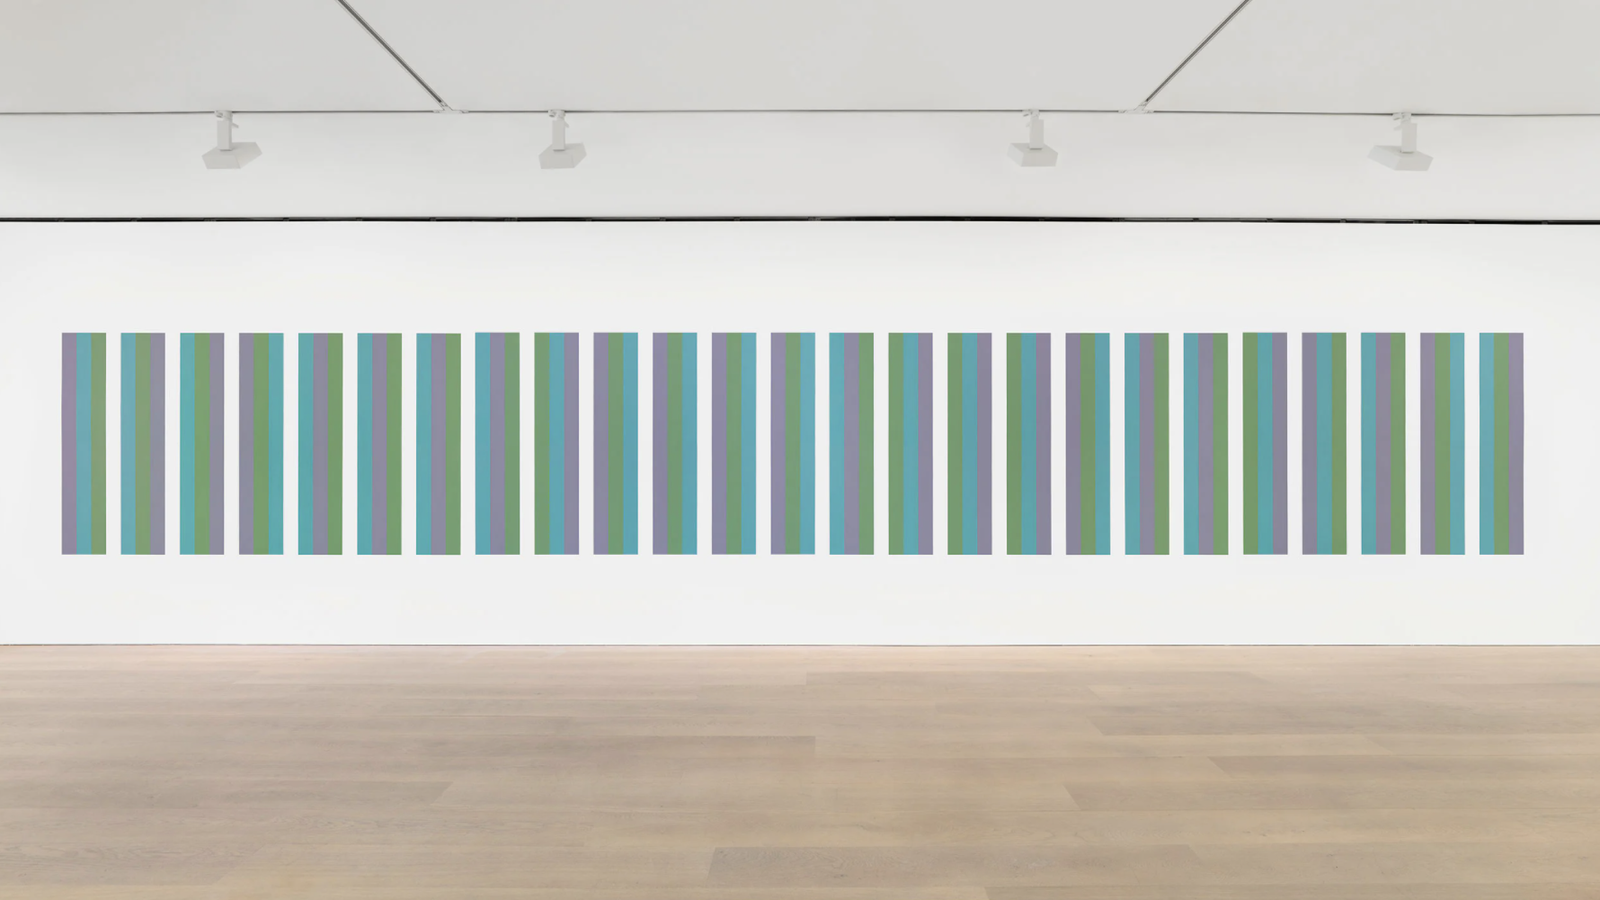 Bridget Riley, Intervals Wall Painting, exhibition view, 3 June - 2 October 2021, Bridget Riley: Past into Present, David Zwirner, Grafton Street.Courtesy of the Artist and David Zwirner.